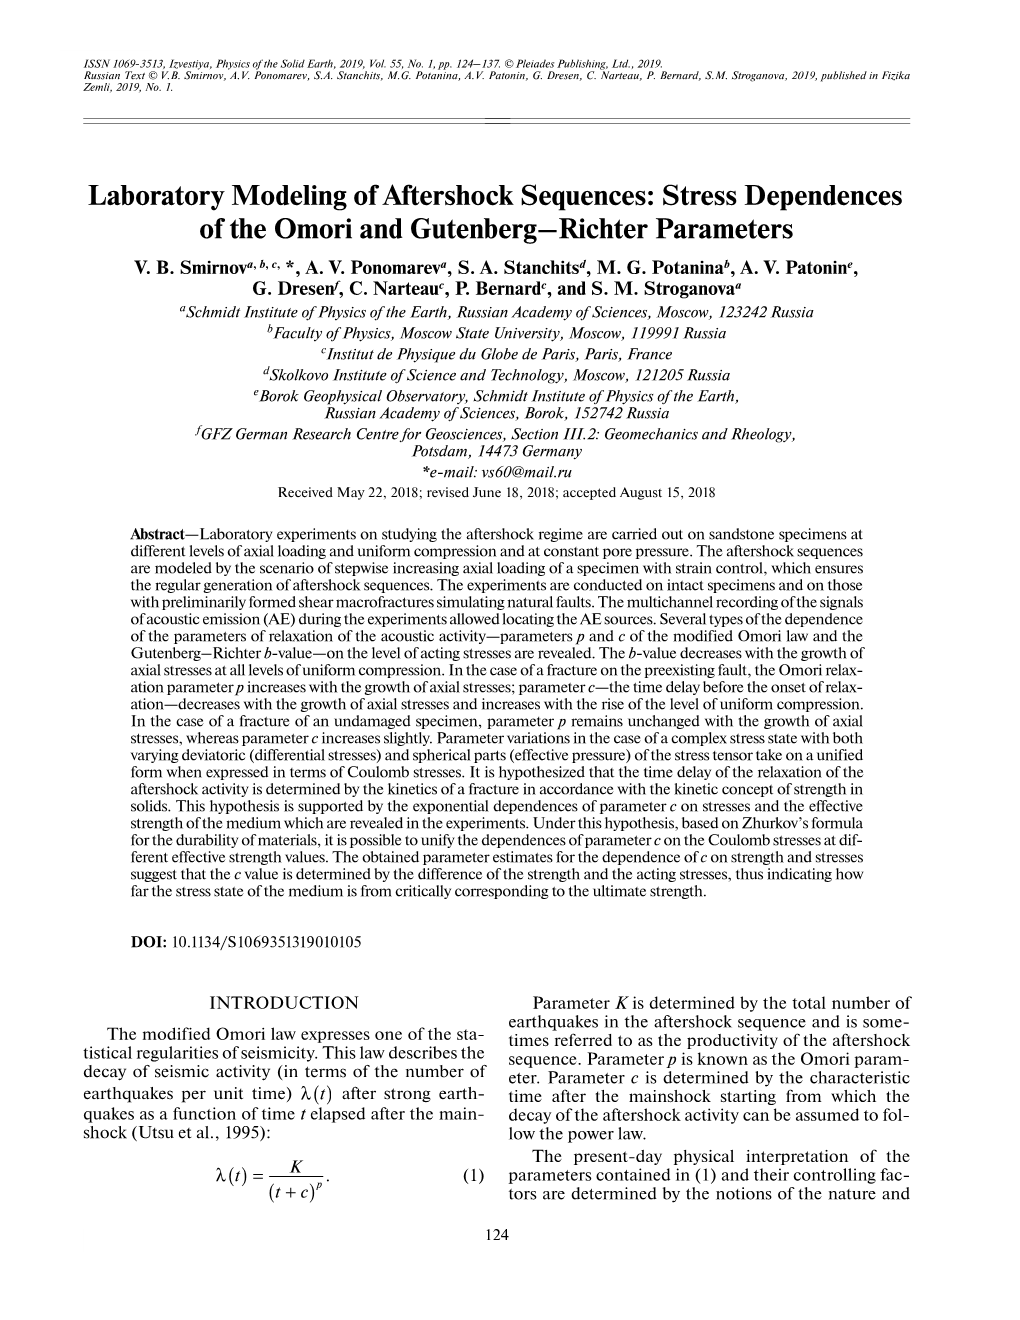 Laboratory Modeling of Aftershock Sequences: Stress Dependences of the Omori and Gutenberg–Richter Parameters V